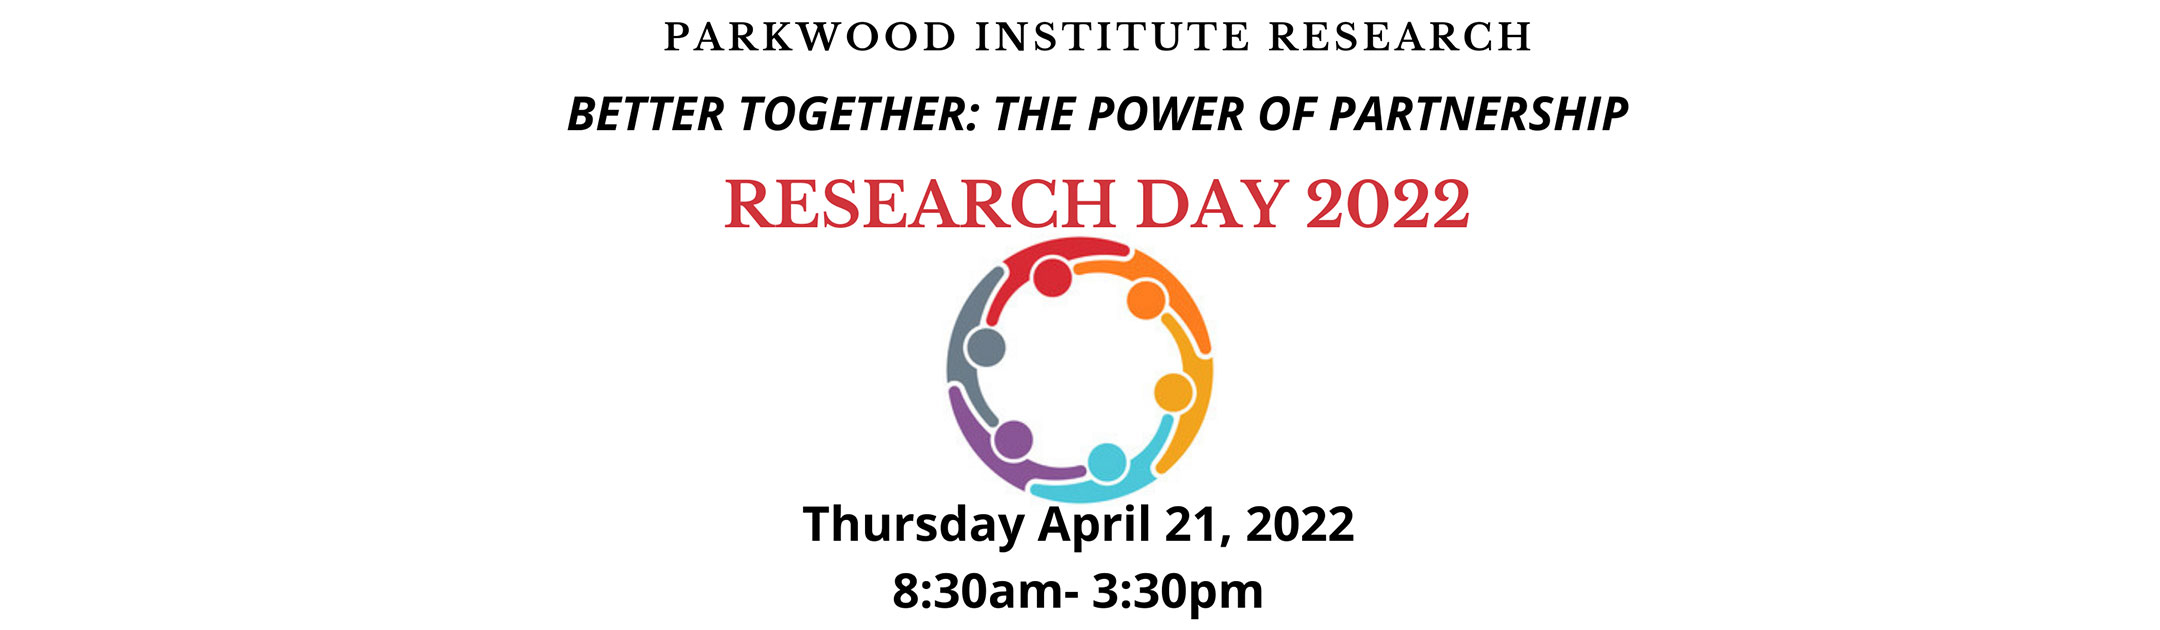 Parkwood Institute Research Day 2022